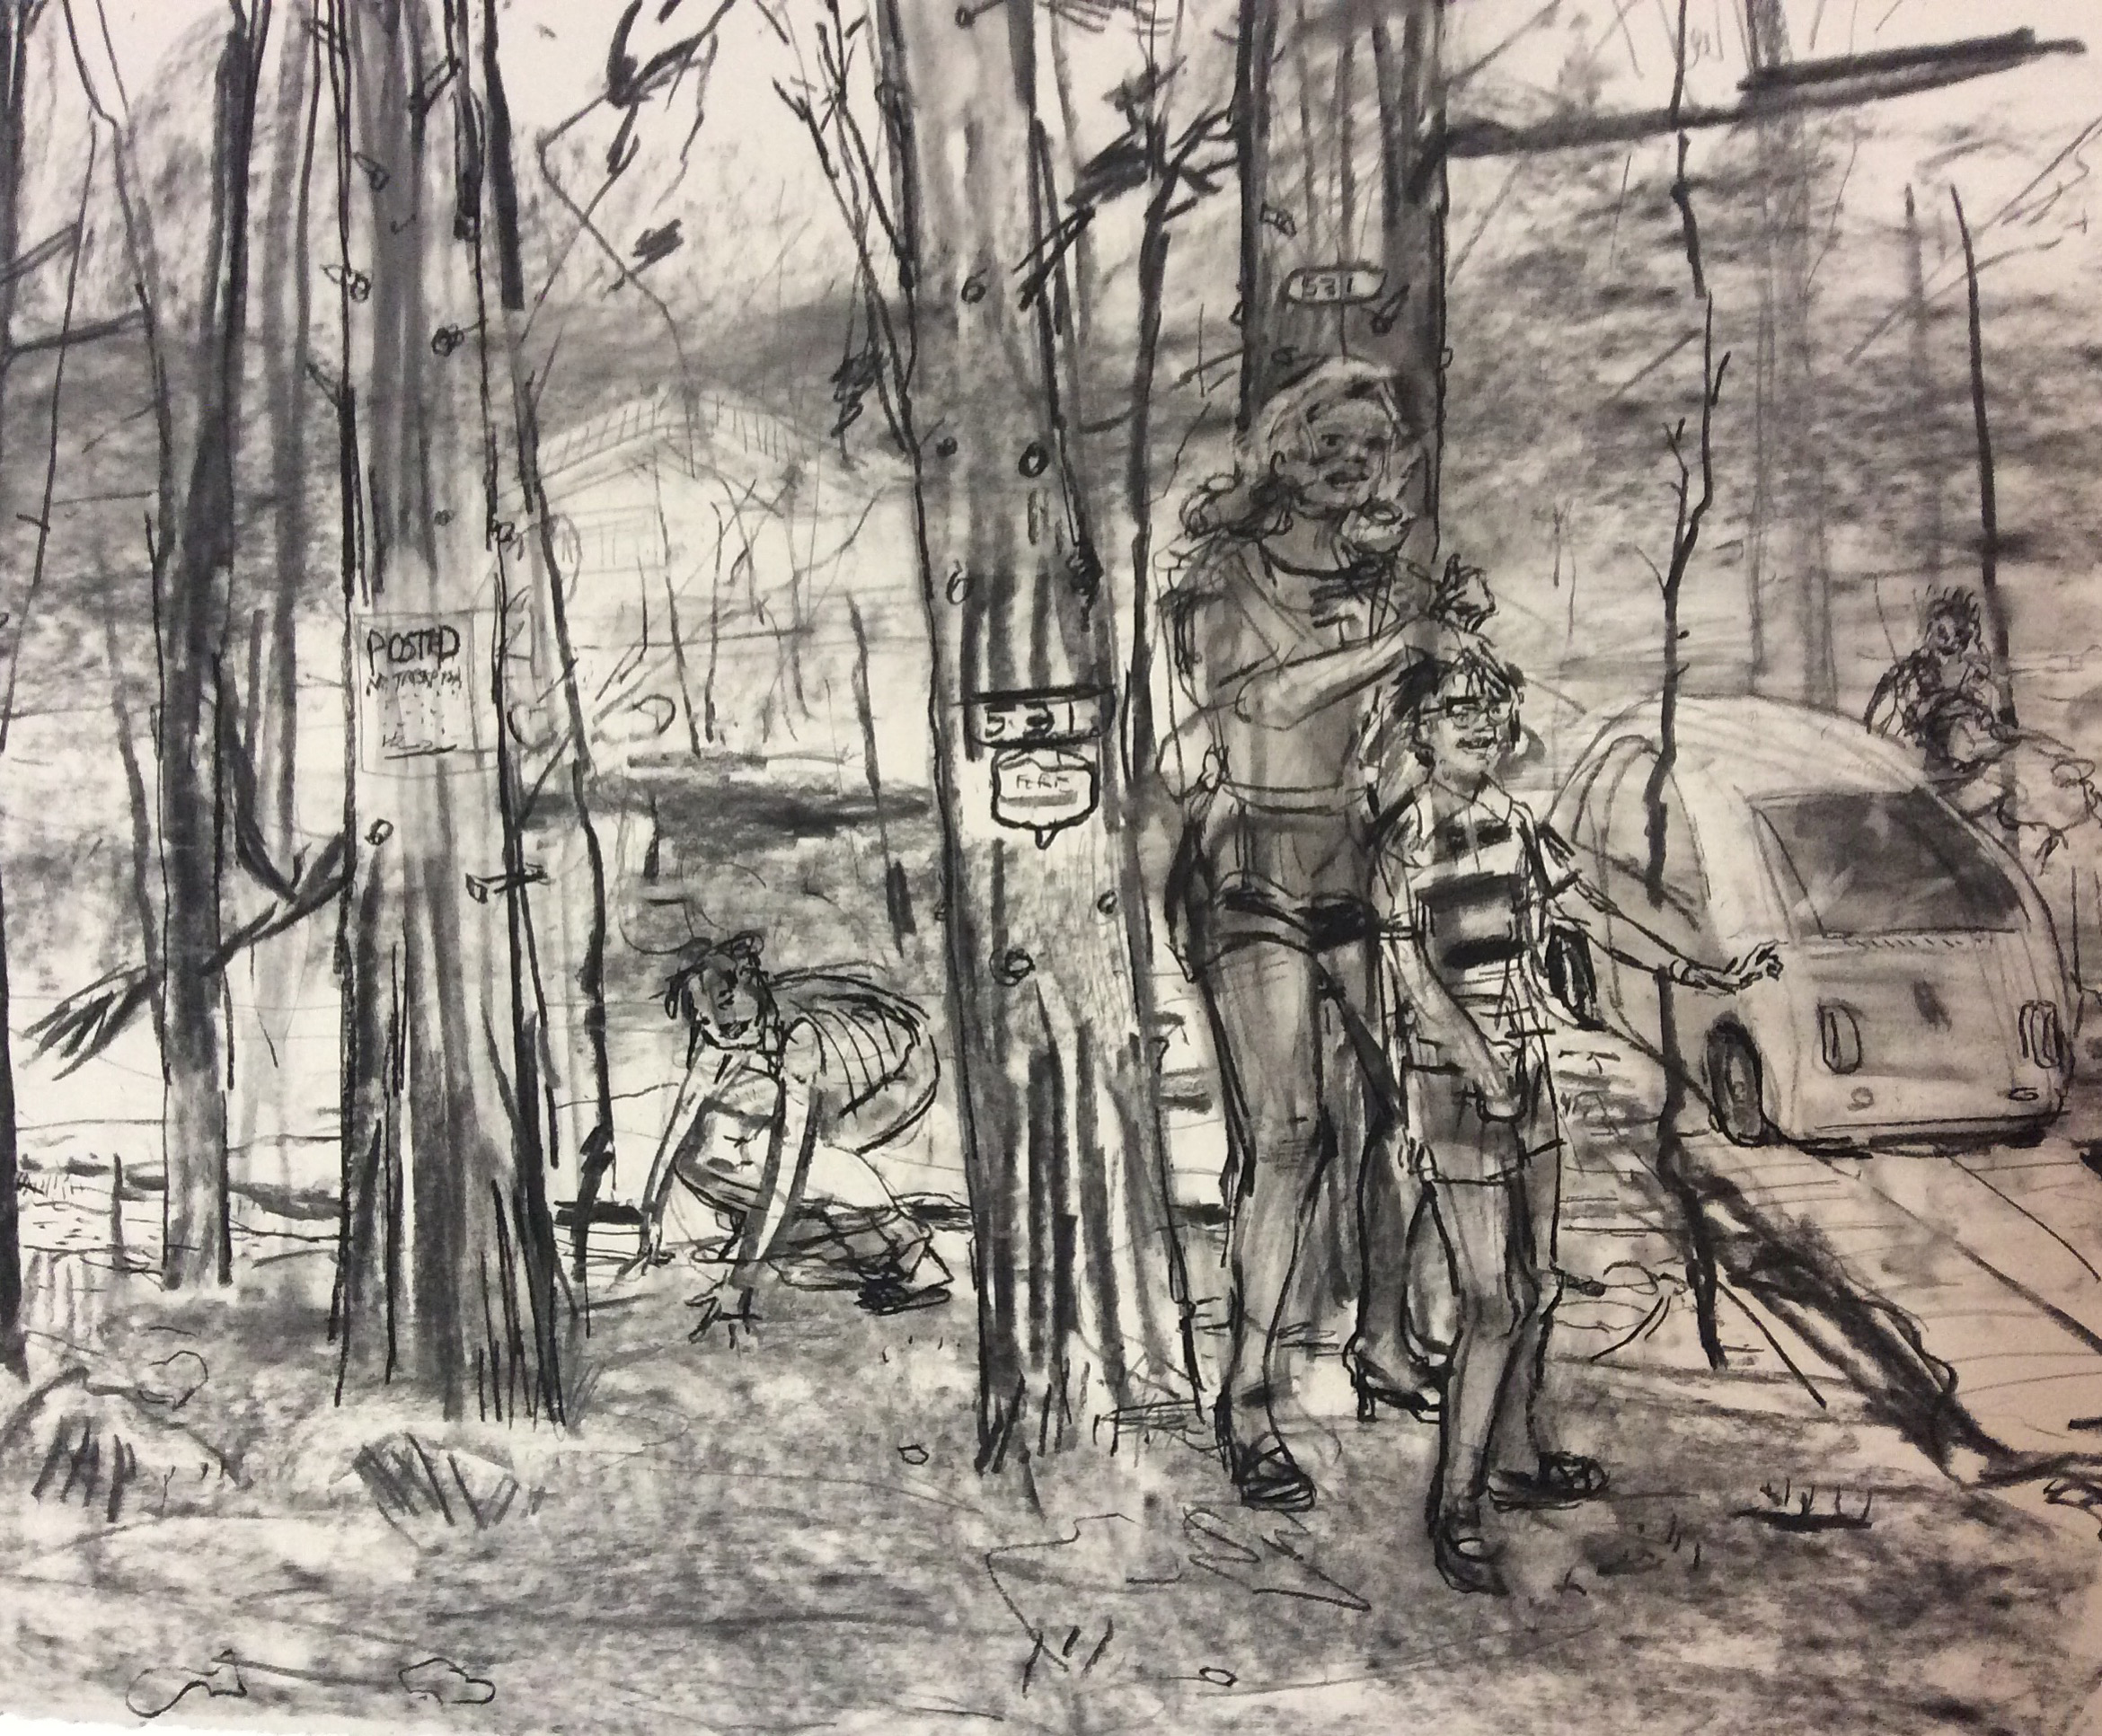 Road Trip Piss charcoal 28 by 40 inches 2016.jpg